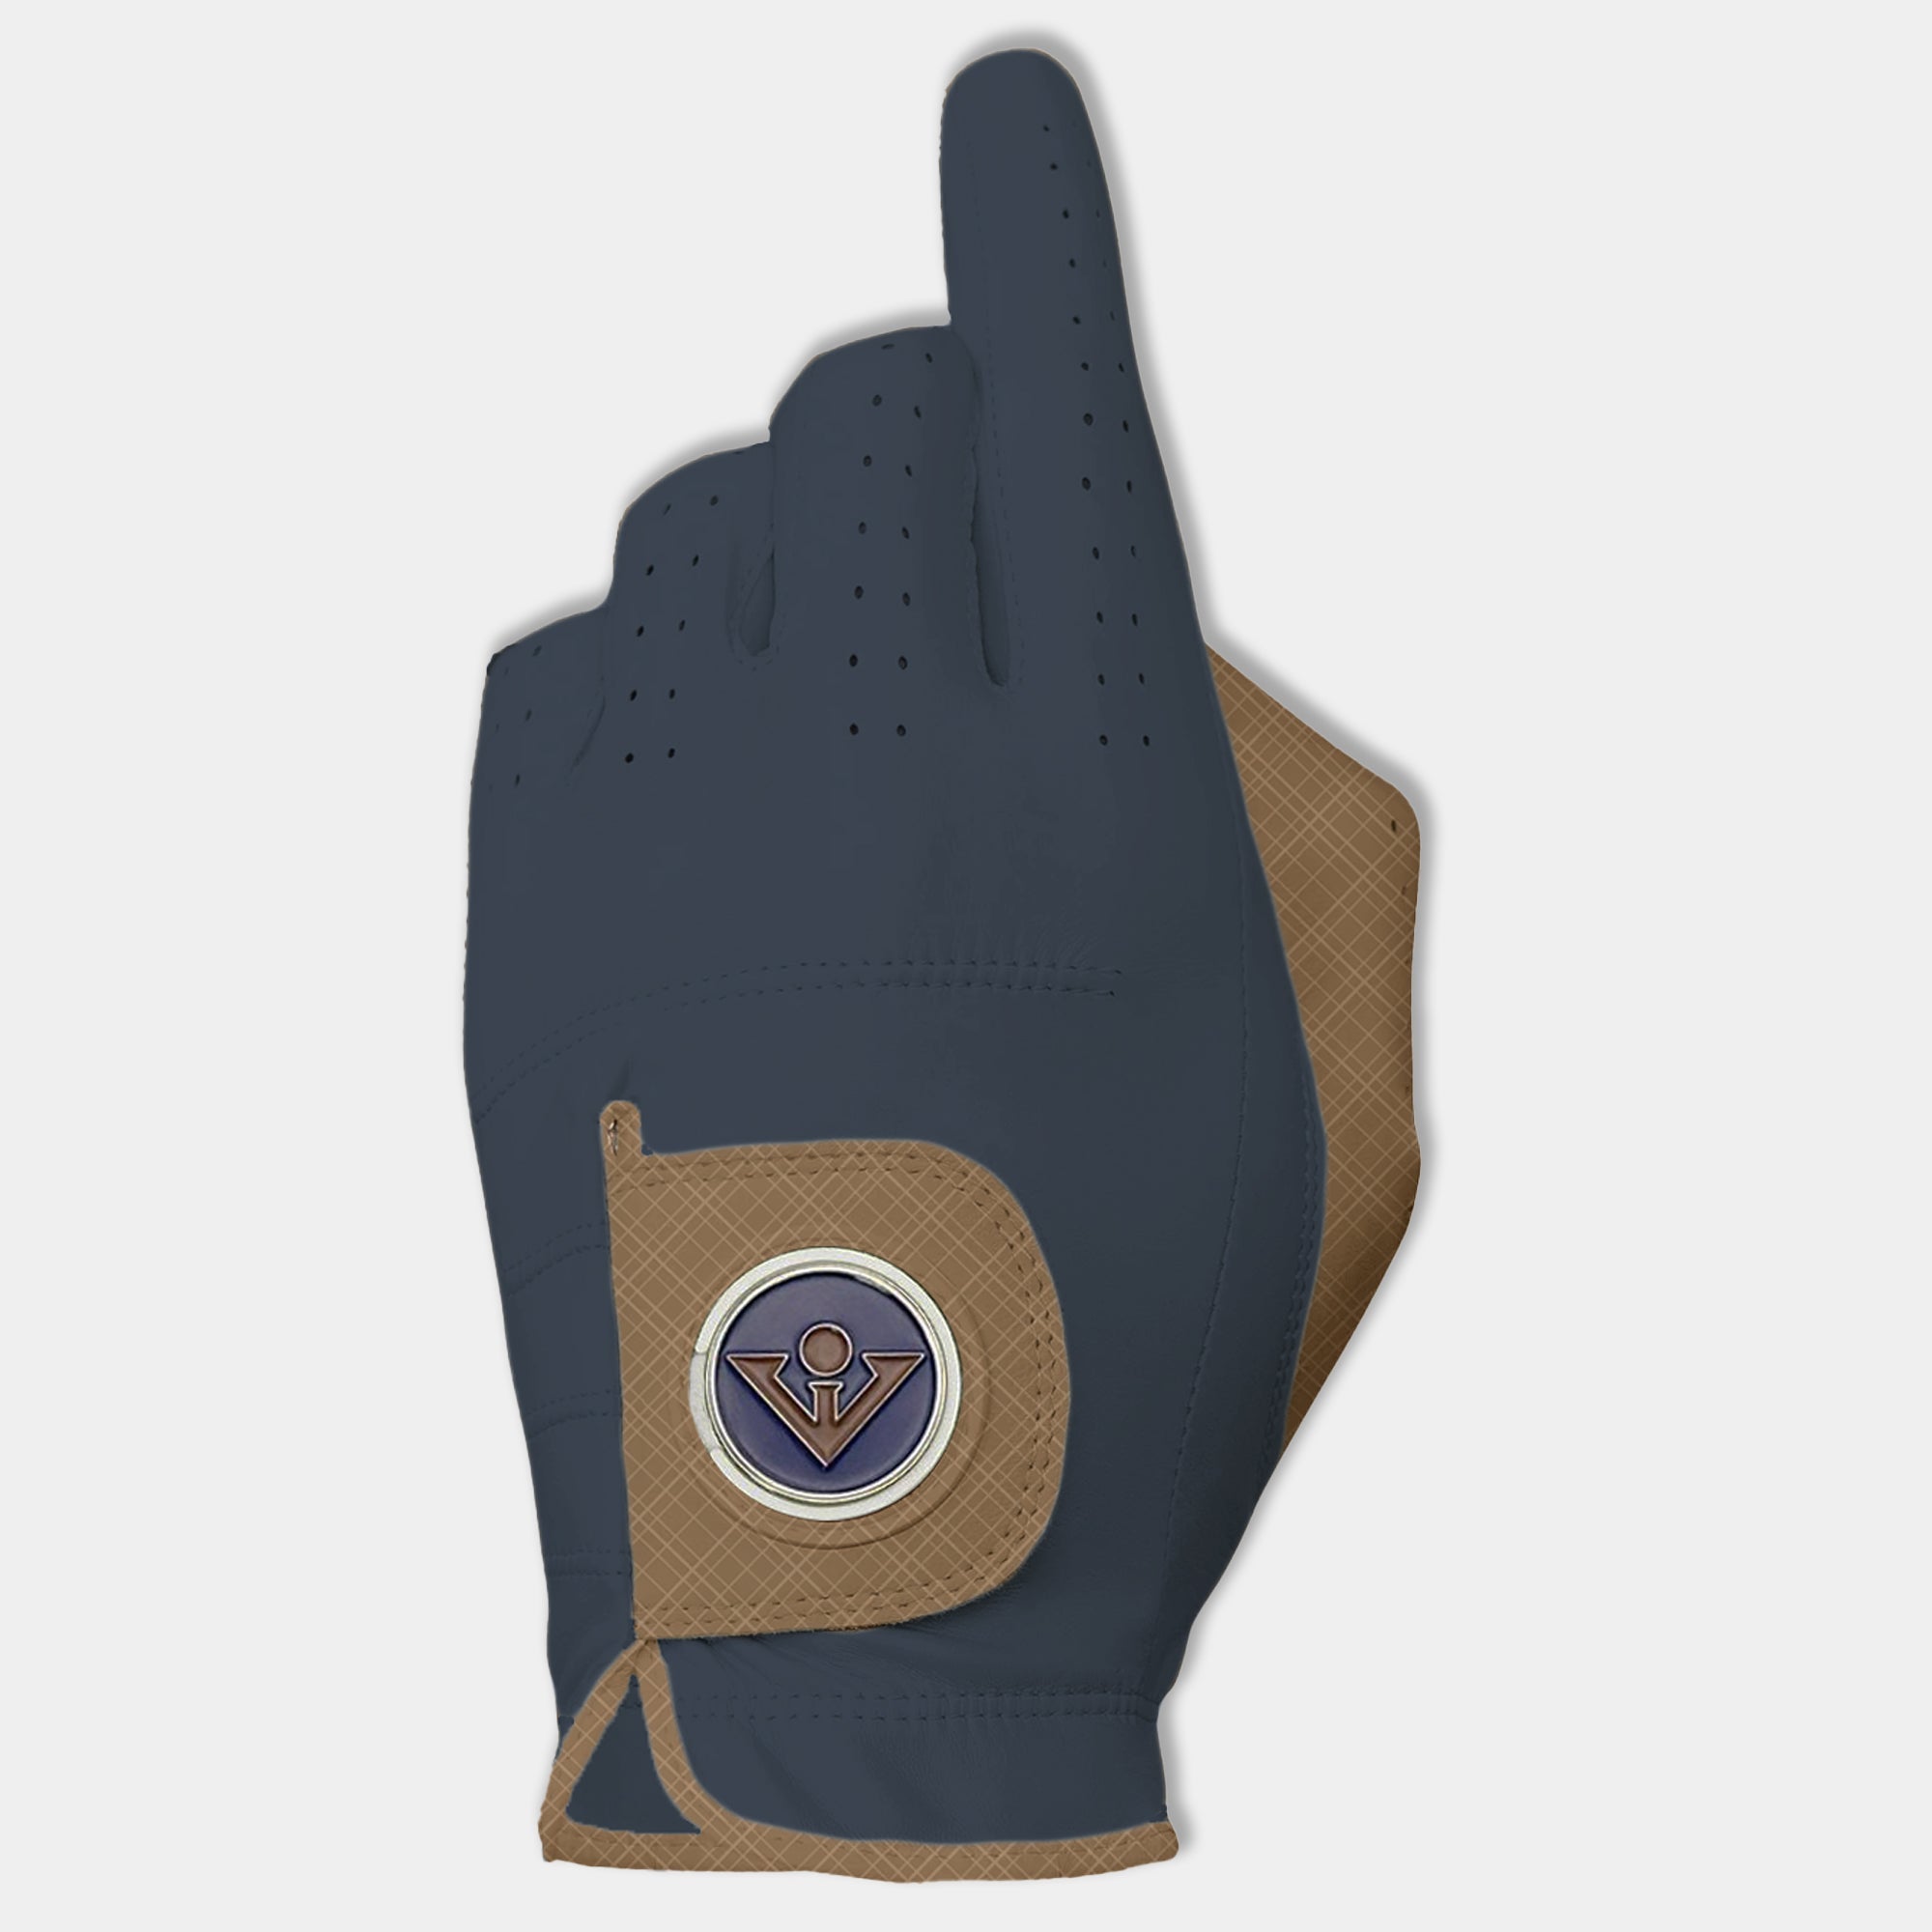 Men's Navy Blue Golf Glove with brown accents.